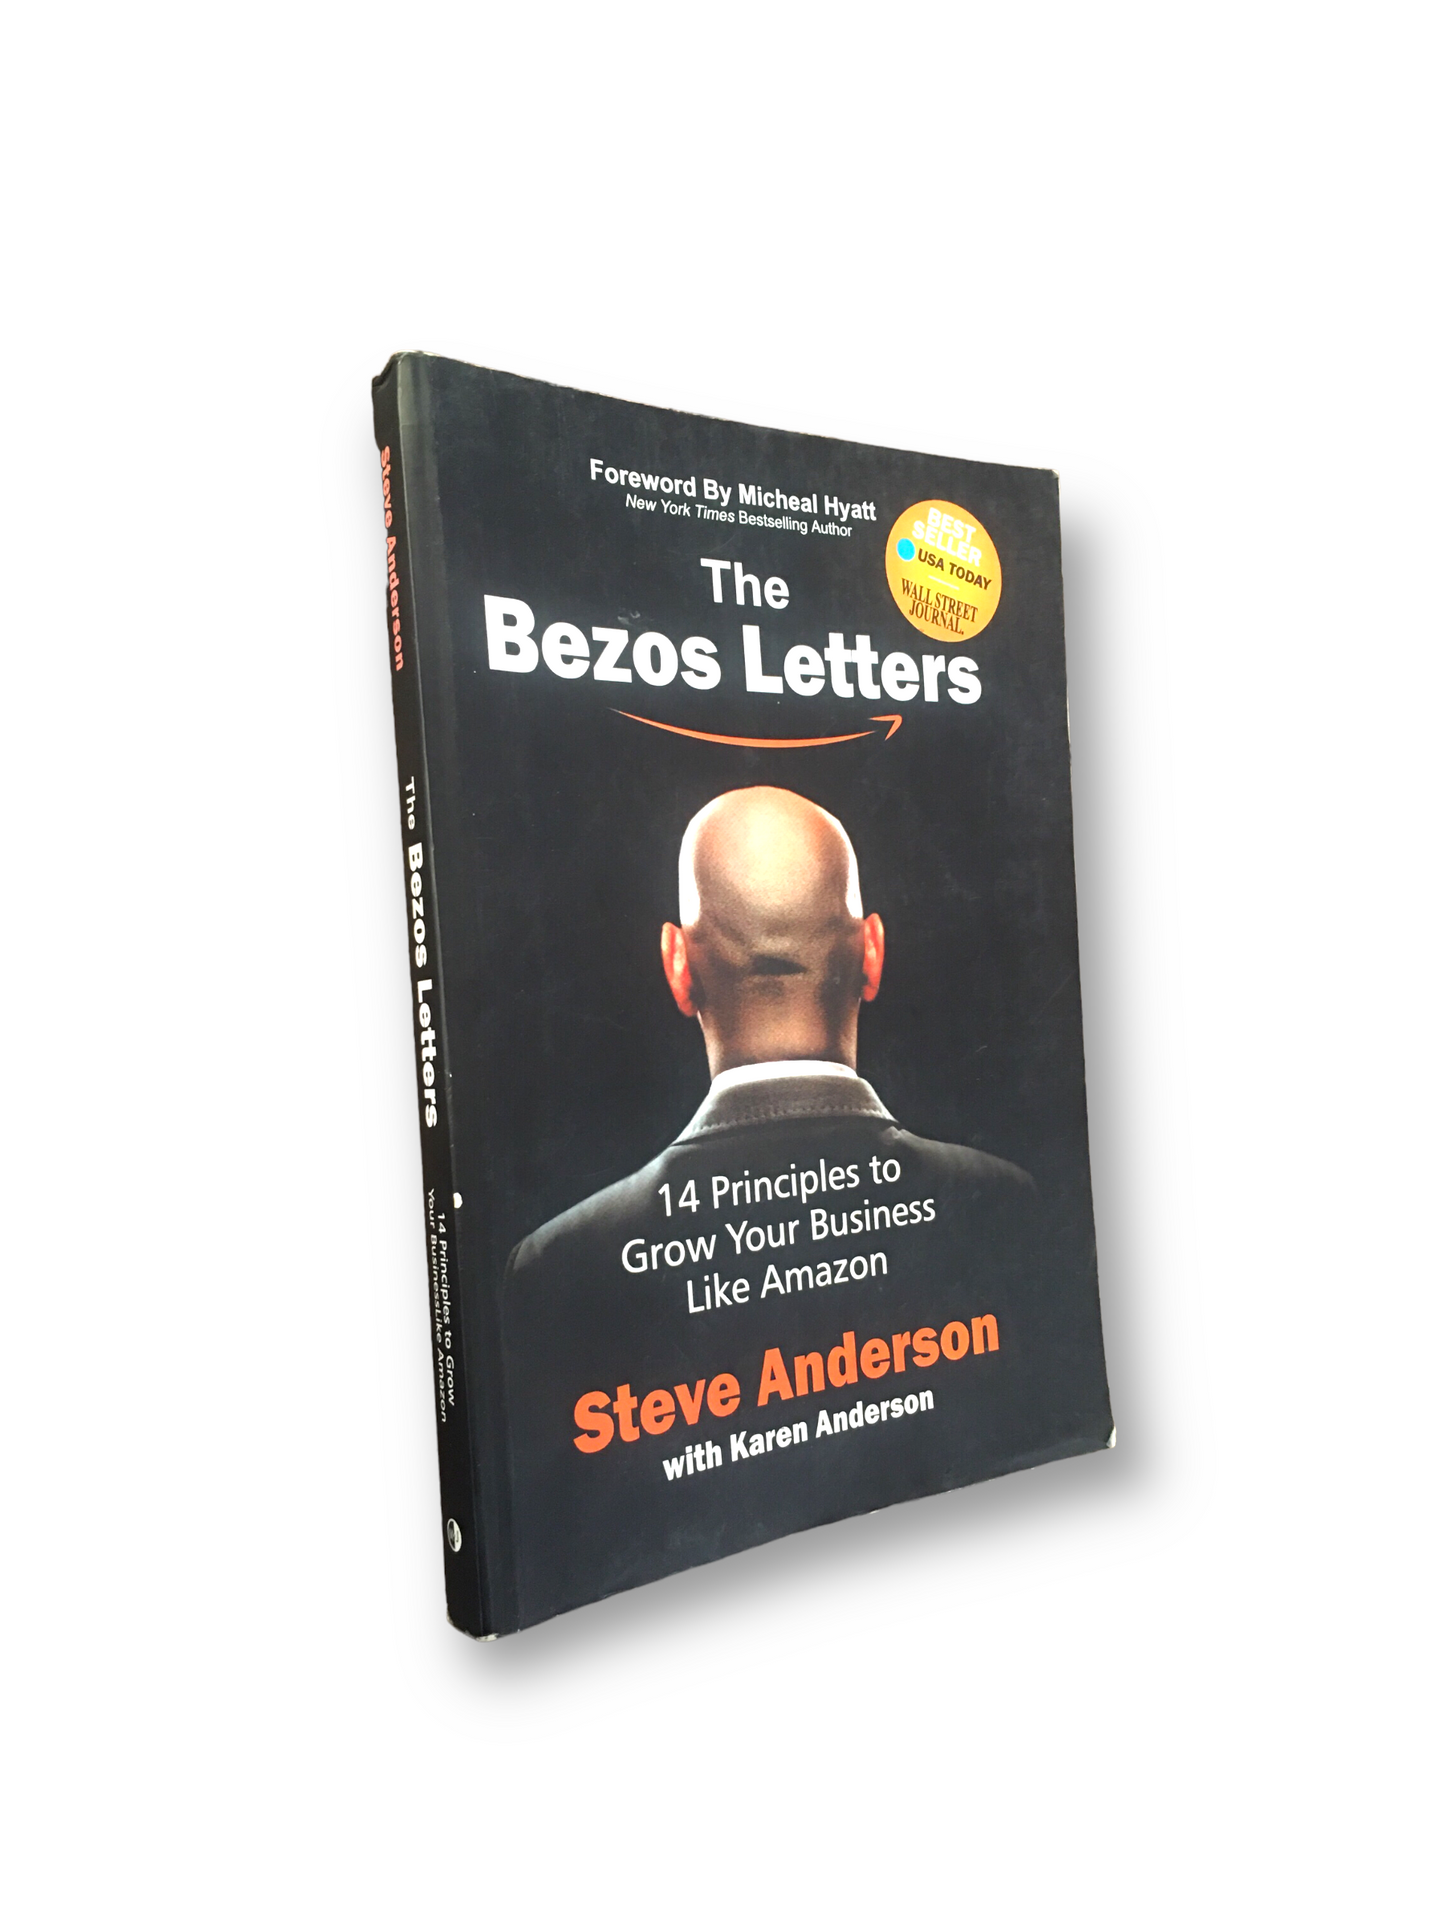 THE BEZOS LETTERS